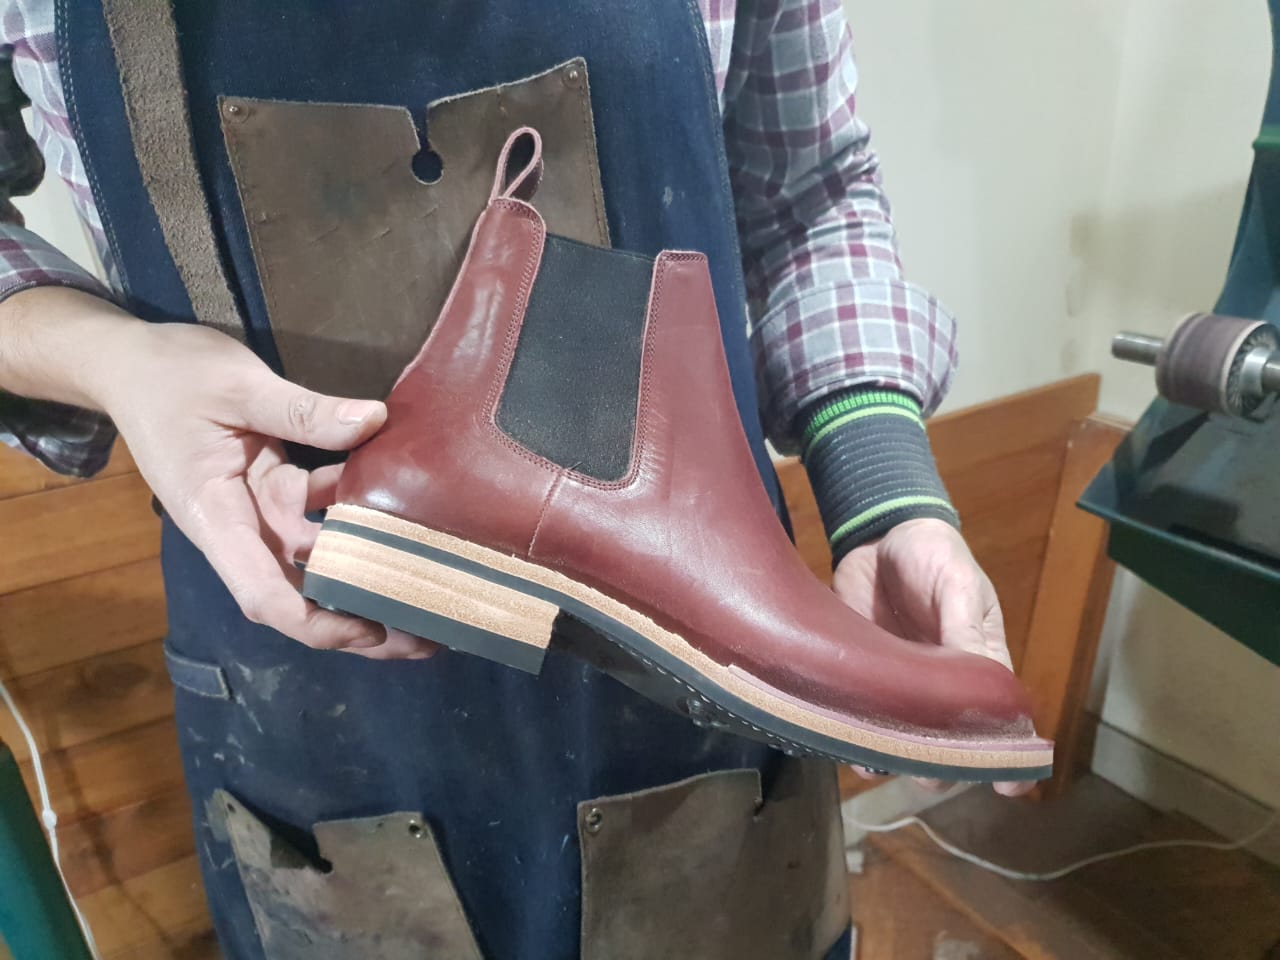 Handmade Boots from a beginner perspective